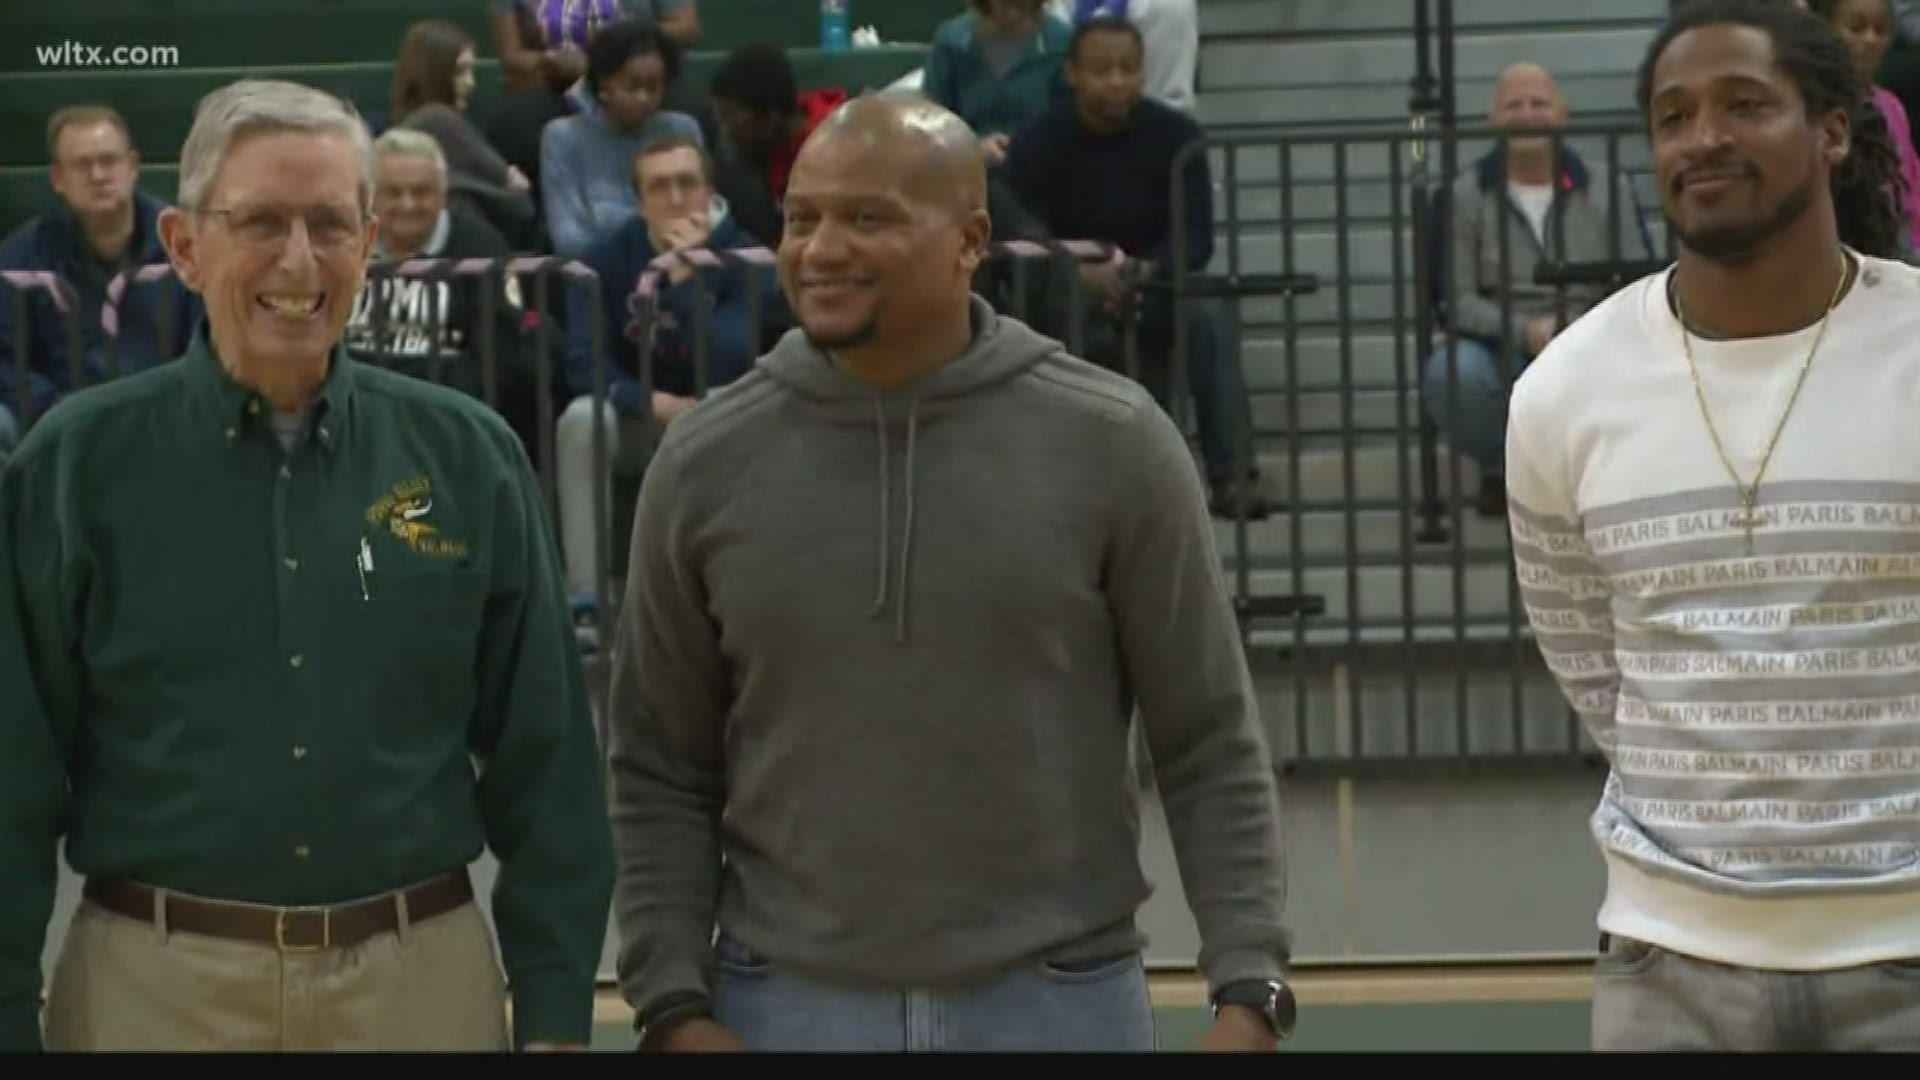 A current NFL player and a former NFL player were recognized Friday night as they are part of the 2019 Spring Valley Hall of Fame class